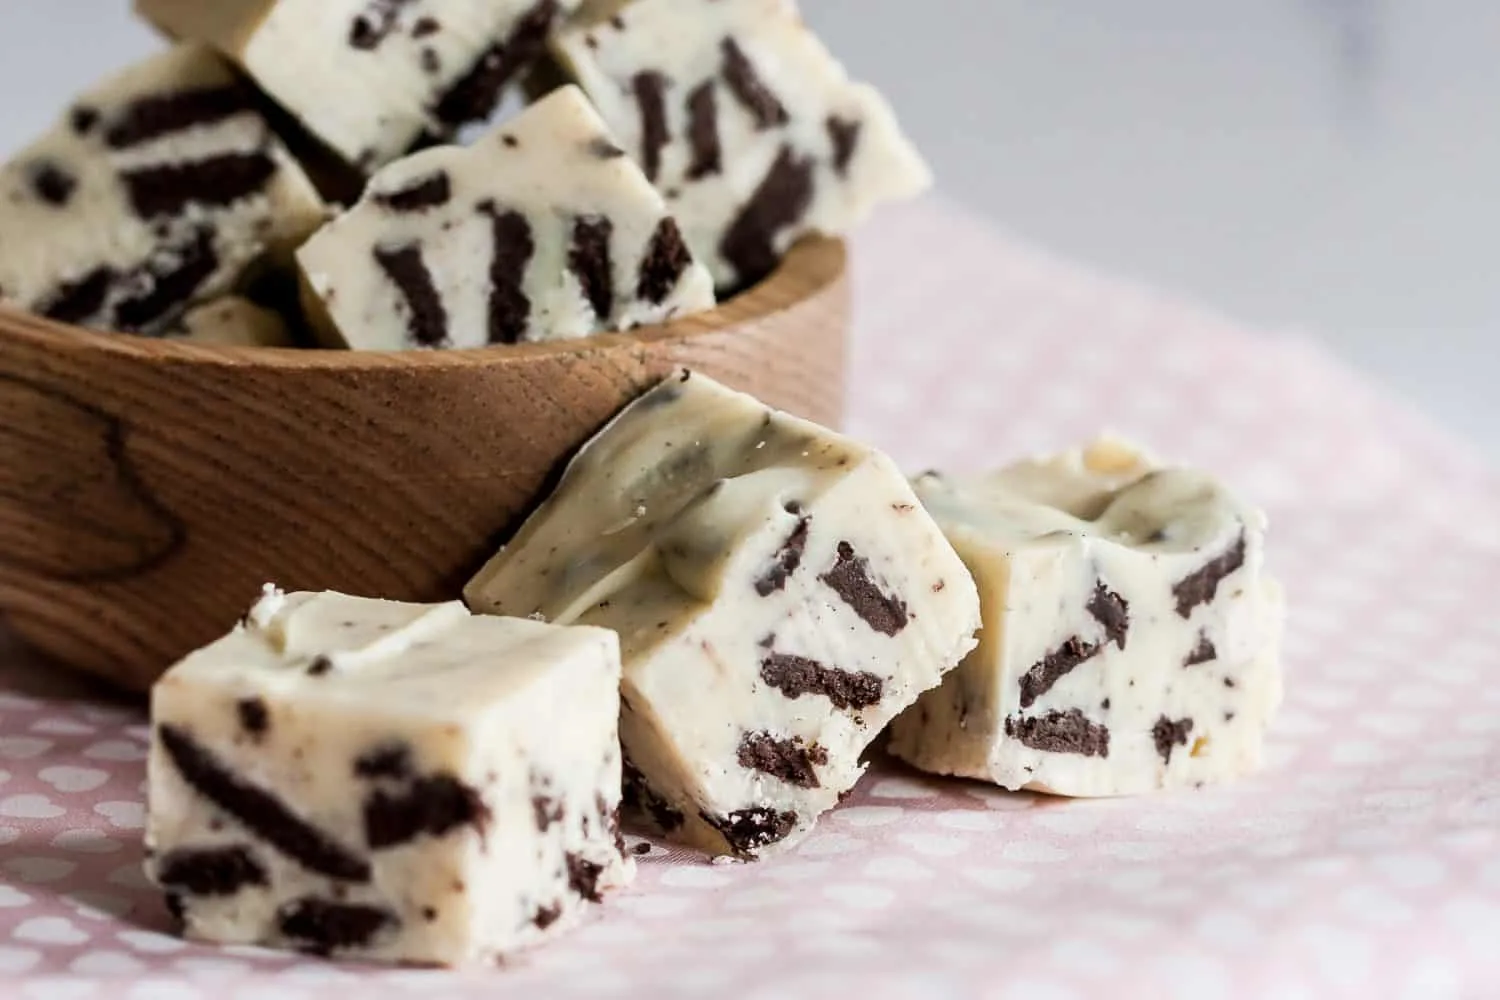 With just 4 ingredients and a few minutes, you can whip up this crowd-pleasing easy cookies and cream fudge! This easy fudge recipe is perfect for parties or a sweet edible gift. * GoodieGodmother.com